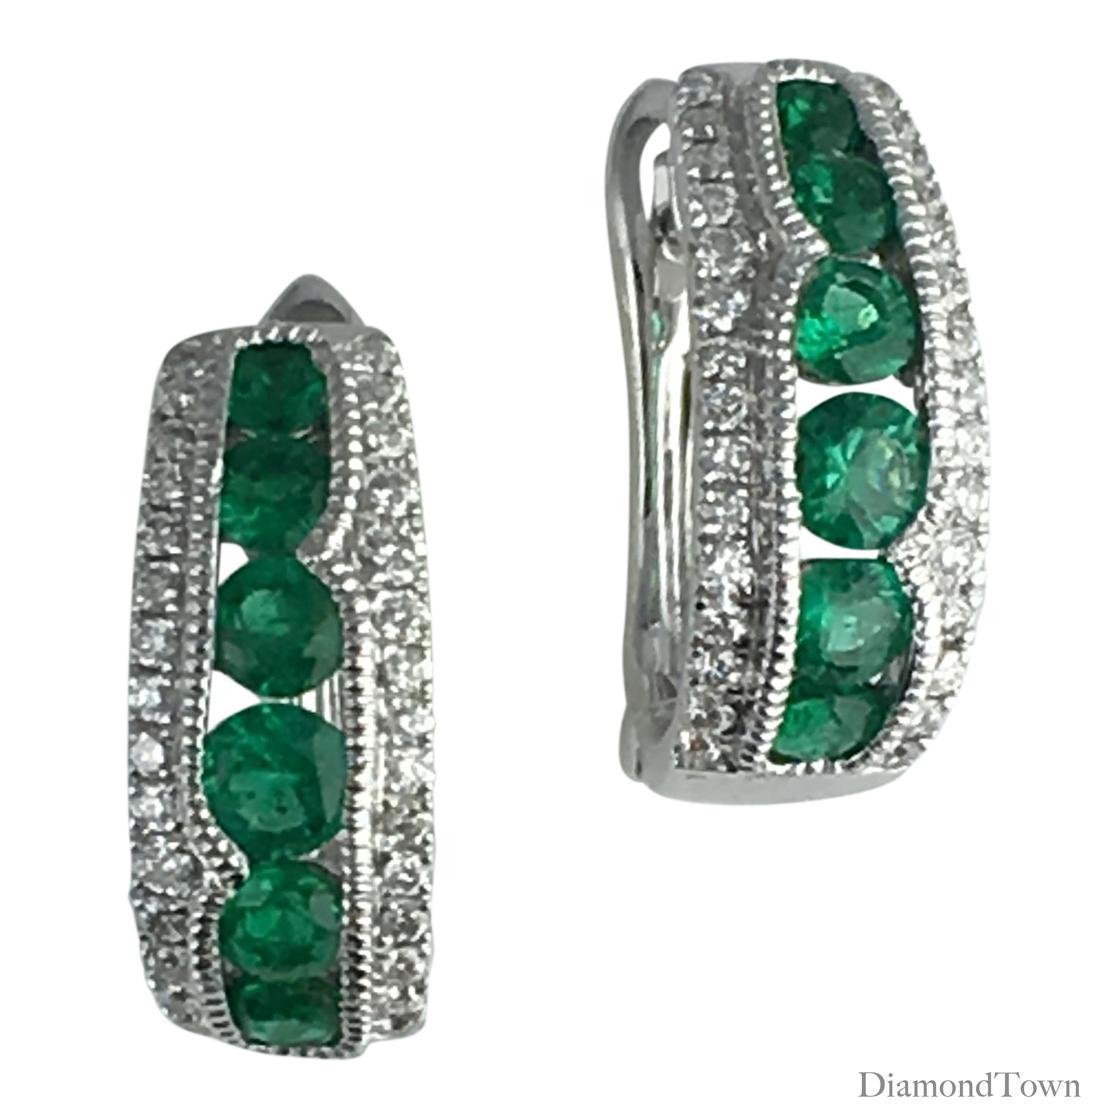 (DiamondTown) These handcrafted hoop stud earrings feature 0.68 carats fine emerald, tucked inside an outline of 0.24 carats white diamonds. The earrings close securely by lever-back.

Many of our items have matching companion pieces. Please